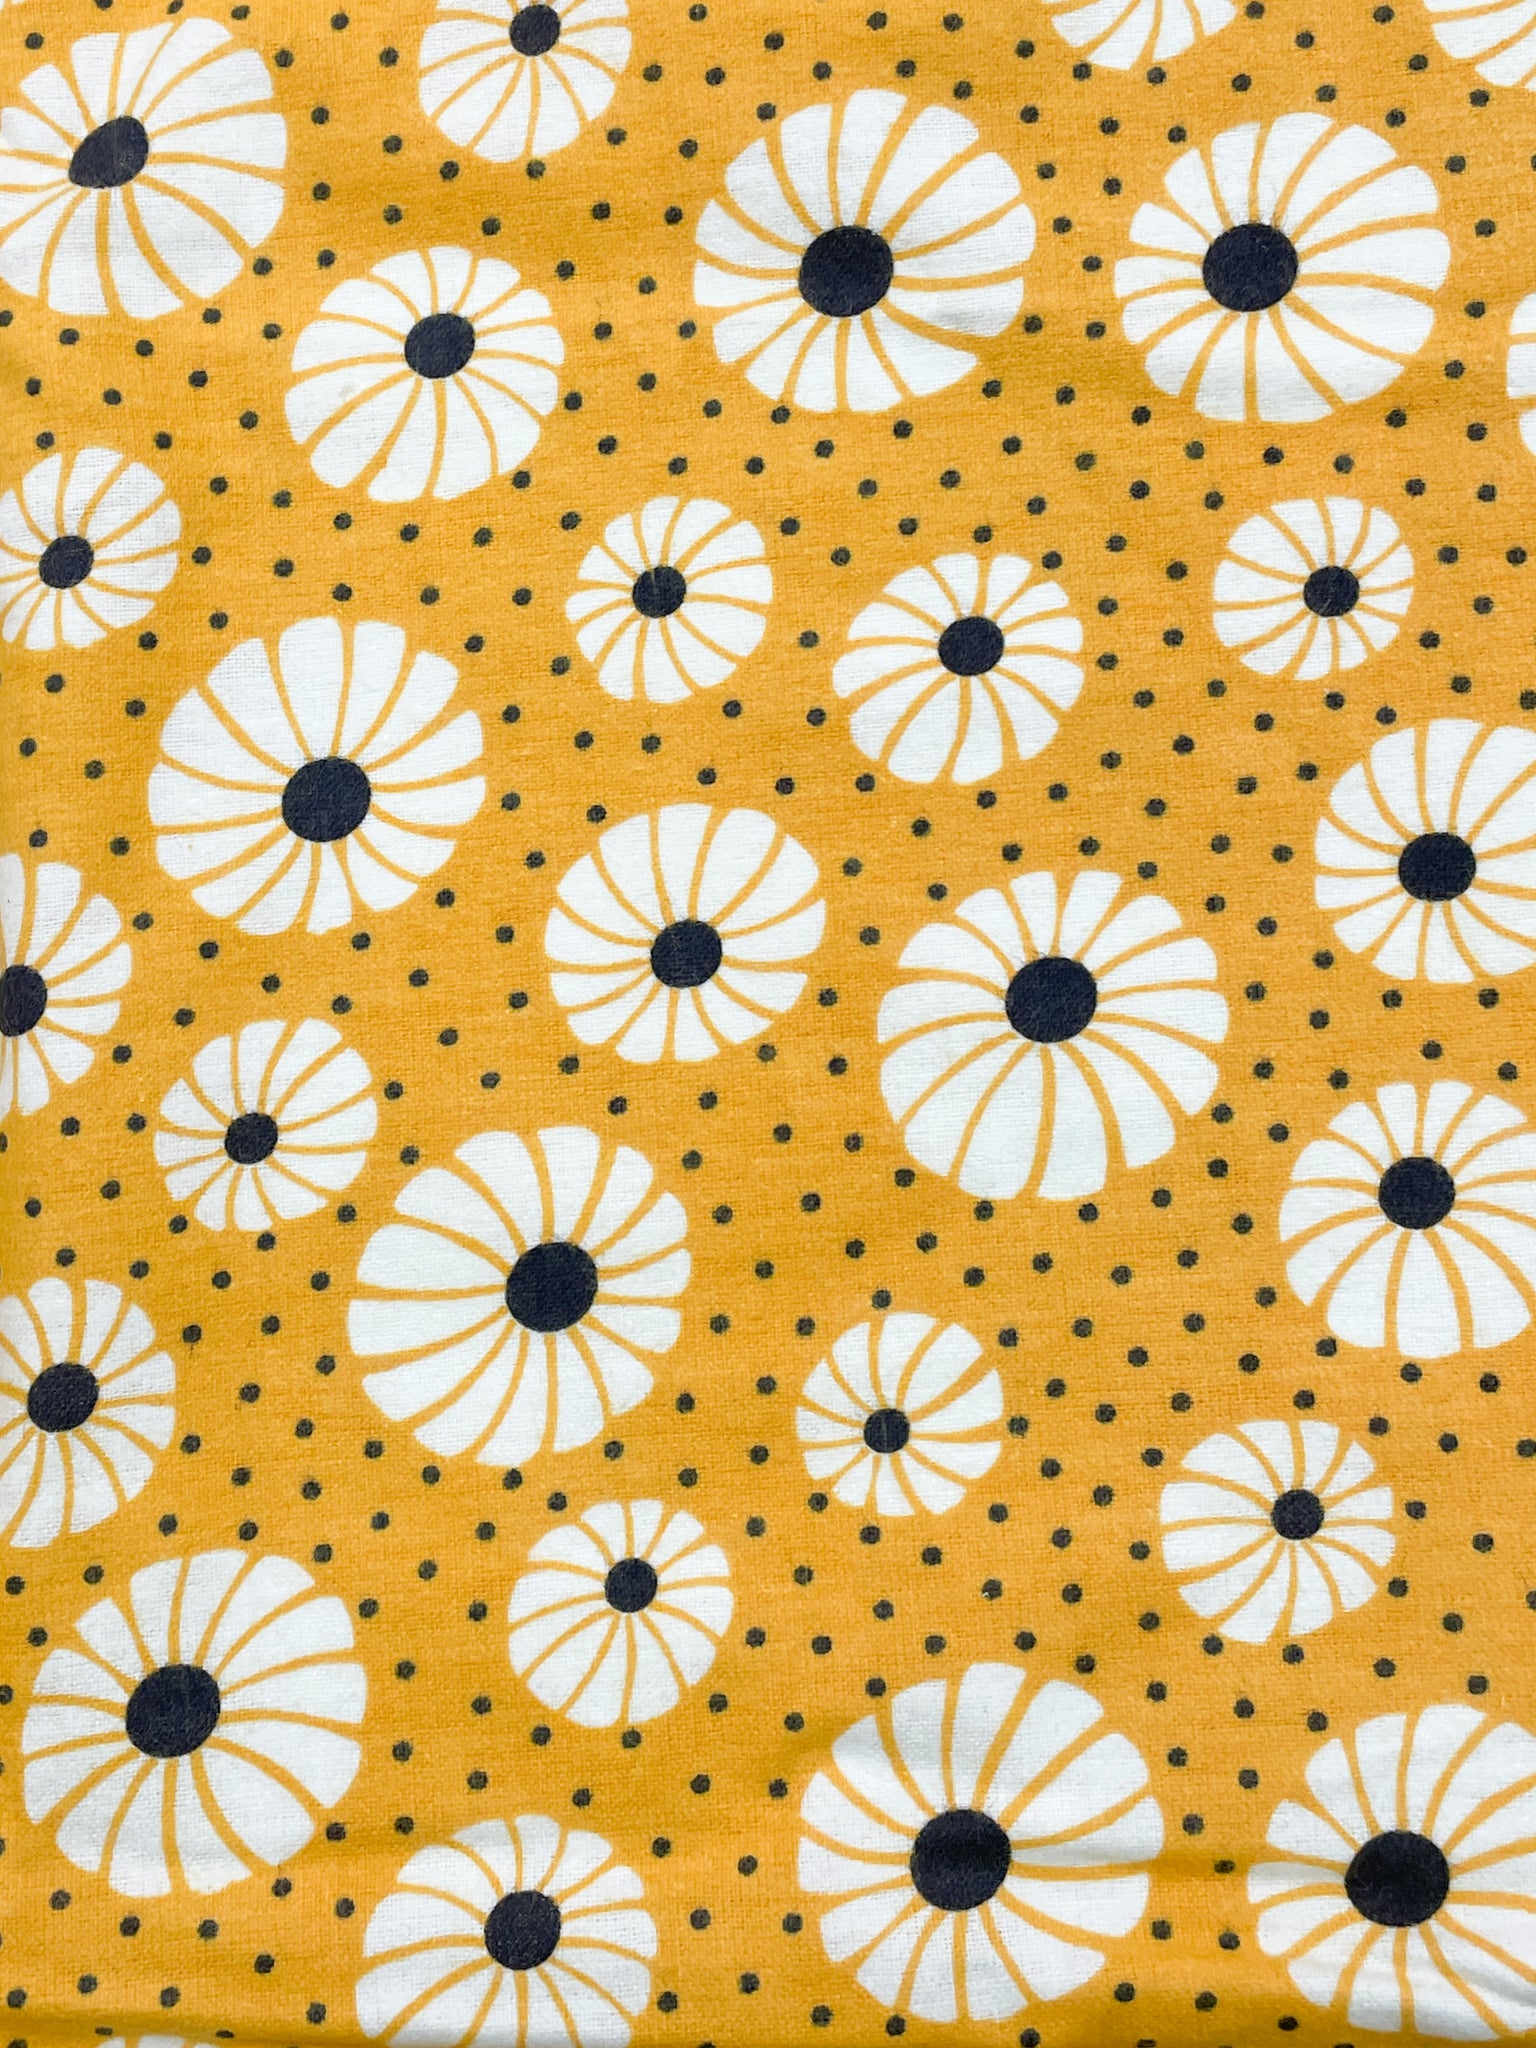 2 YD Cotton Flannel - Golden Yellow with Stylized Daisies